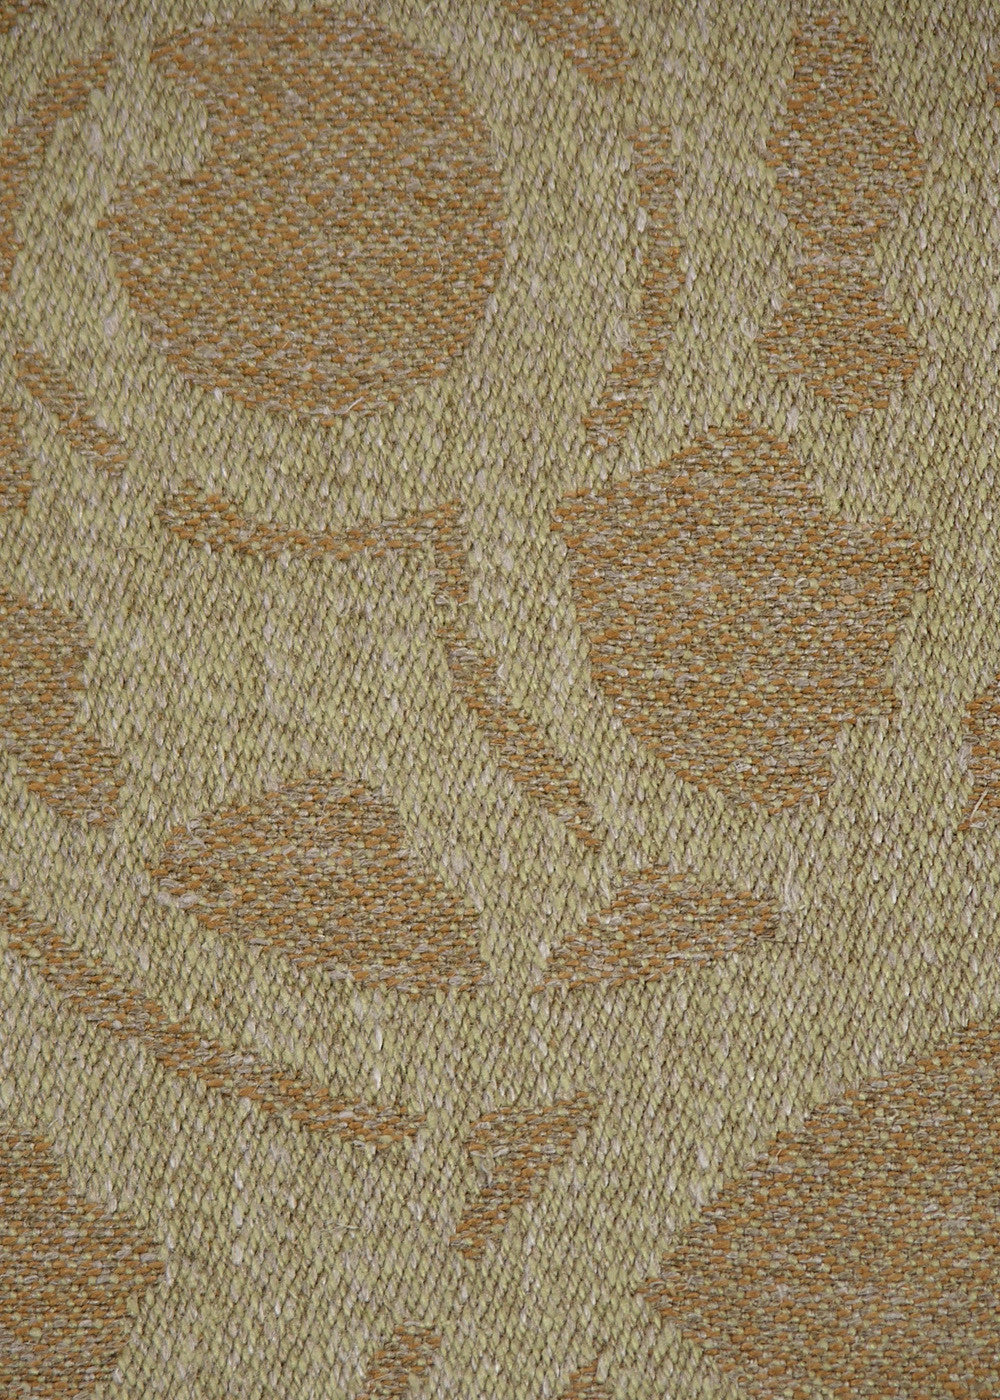 orange and natural fabric with a woven large-scale damask pattern